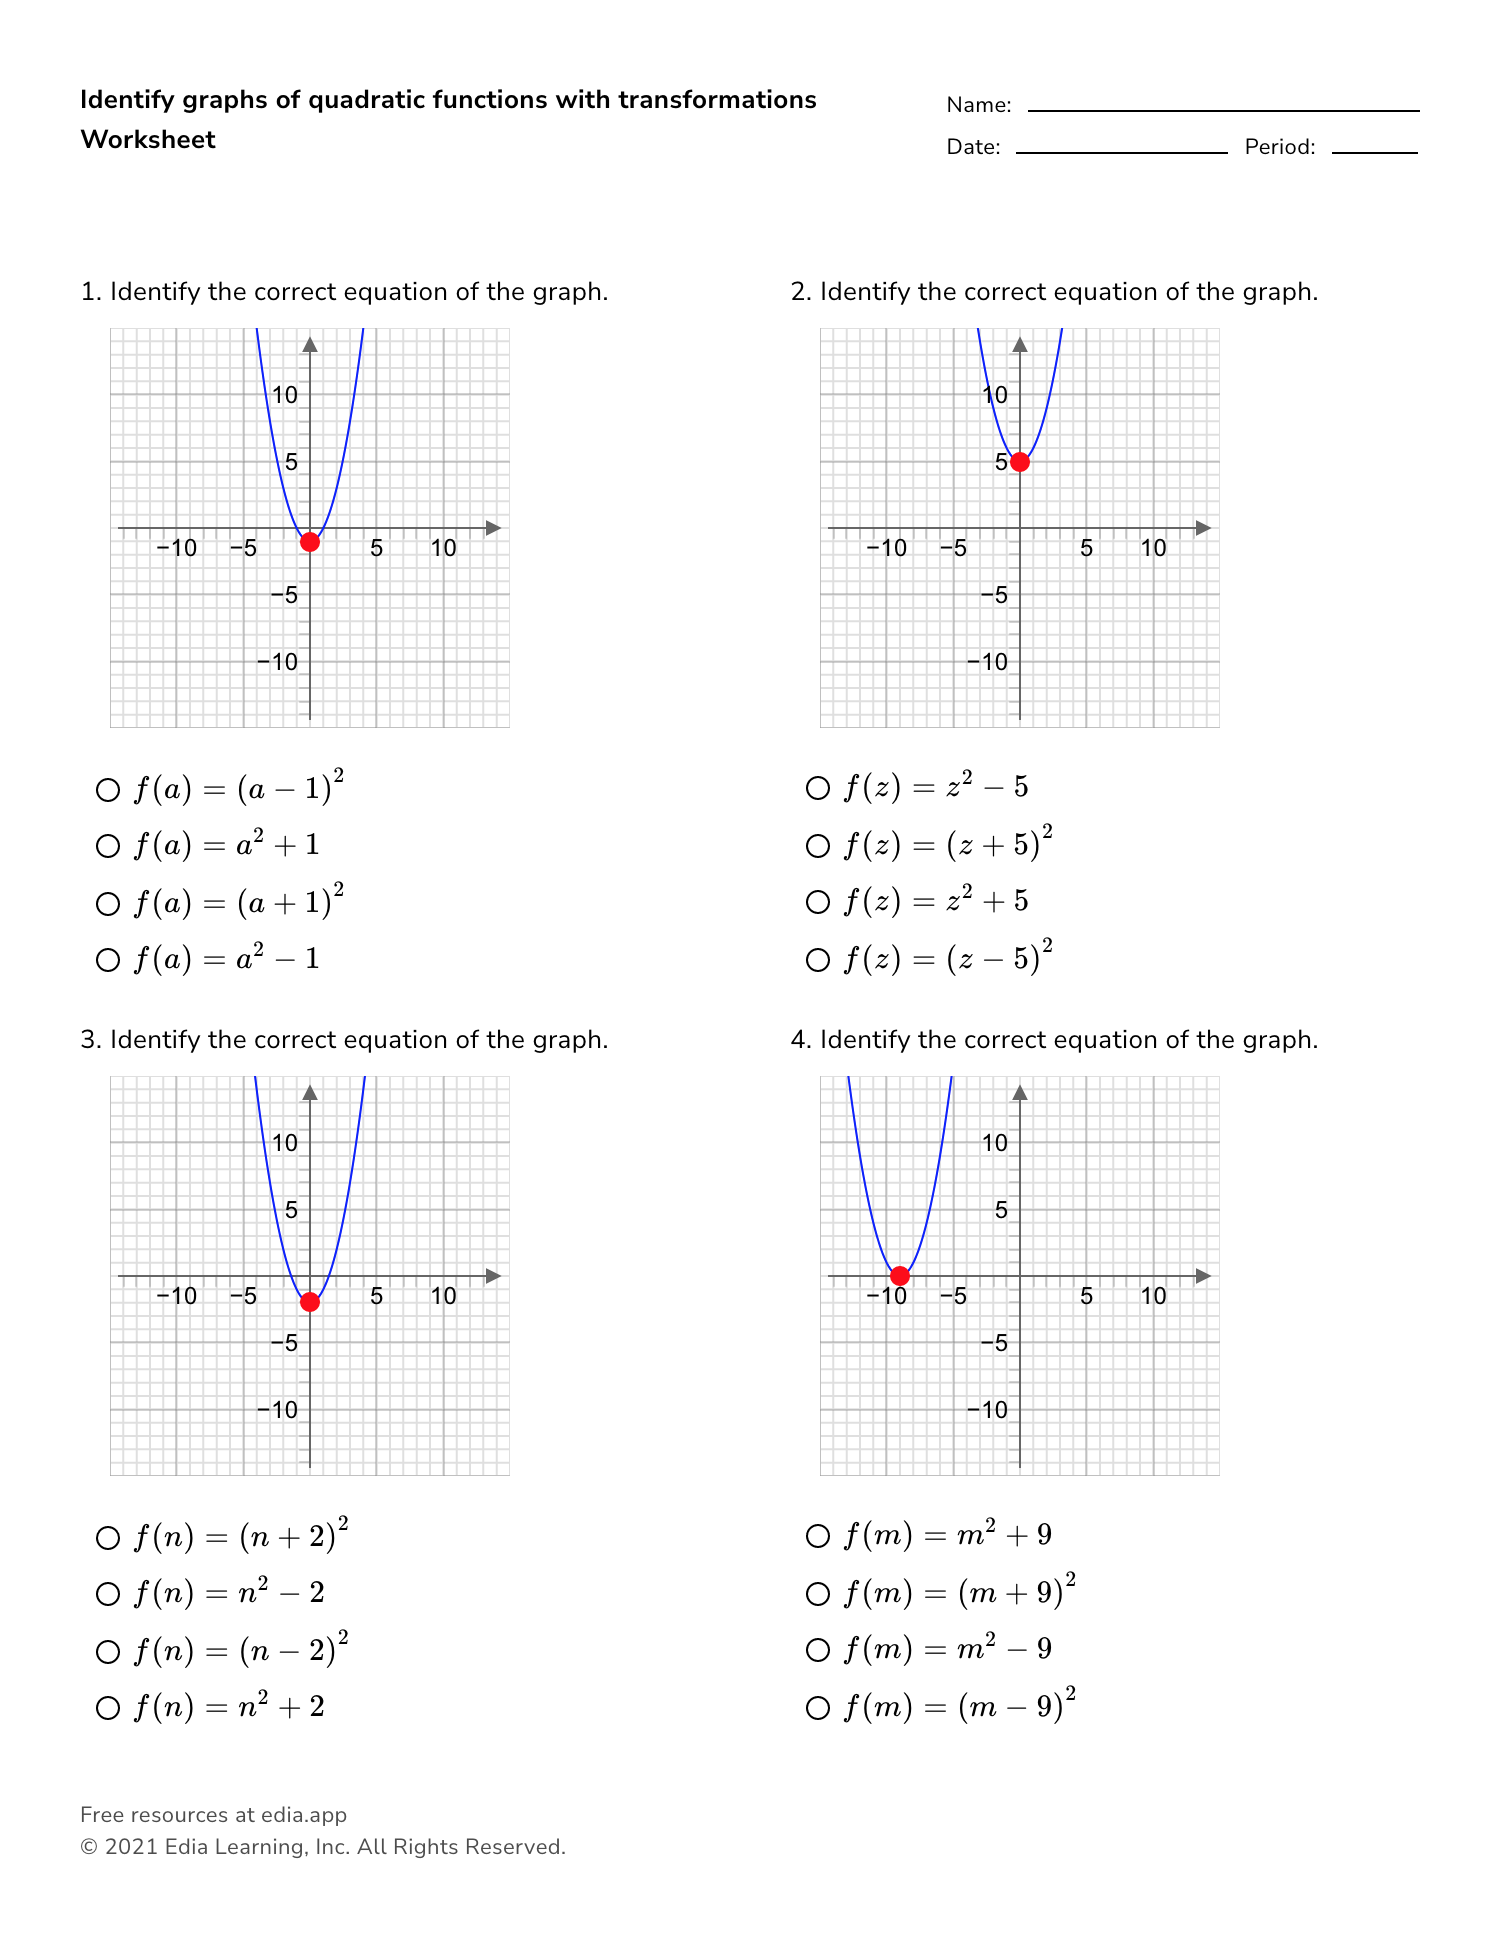 transformations-of-functions-worksheet-answers